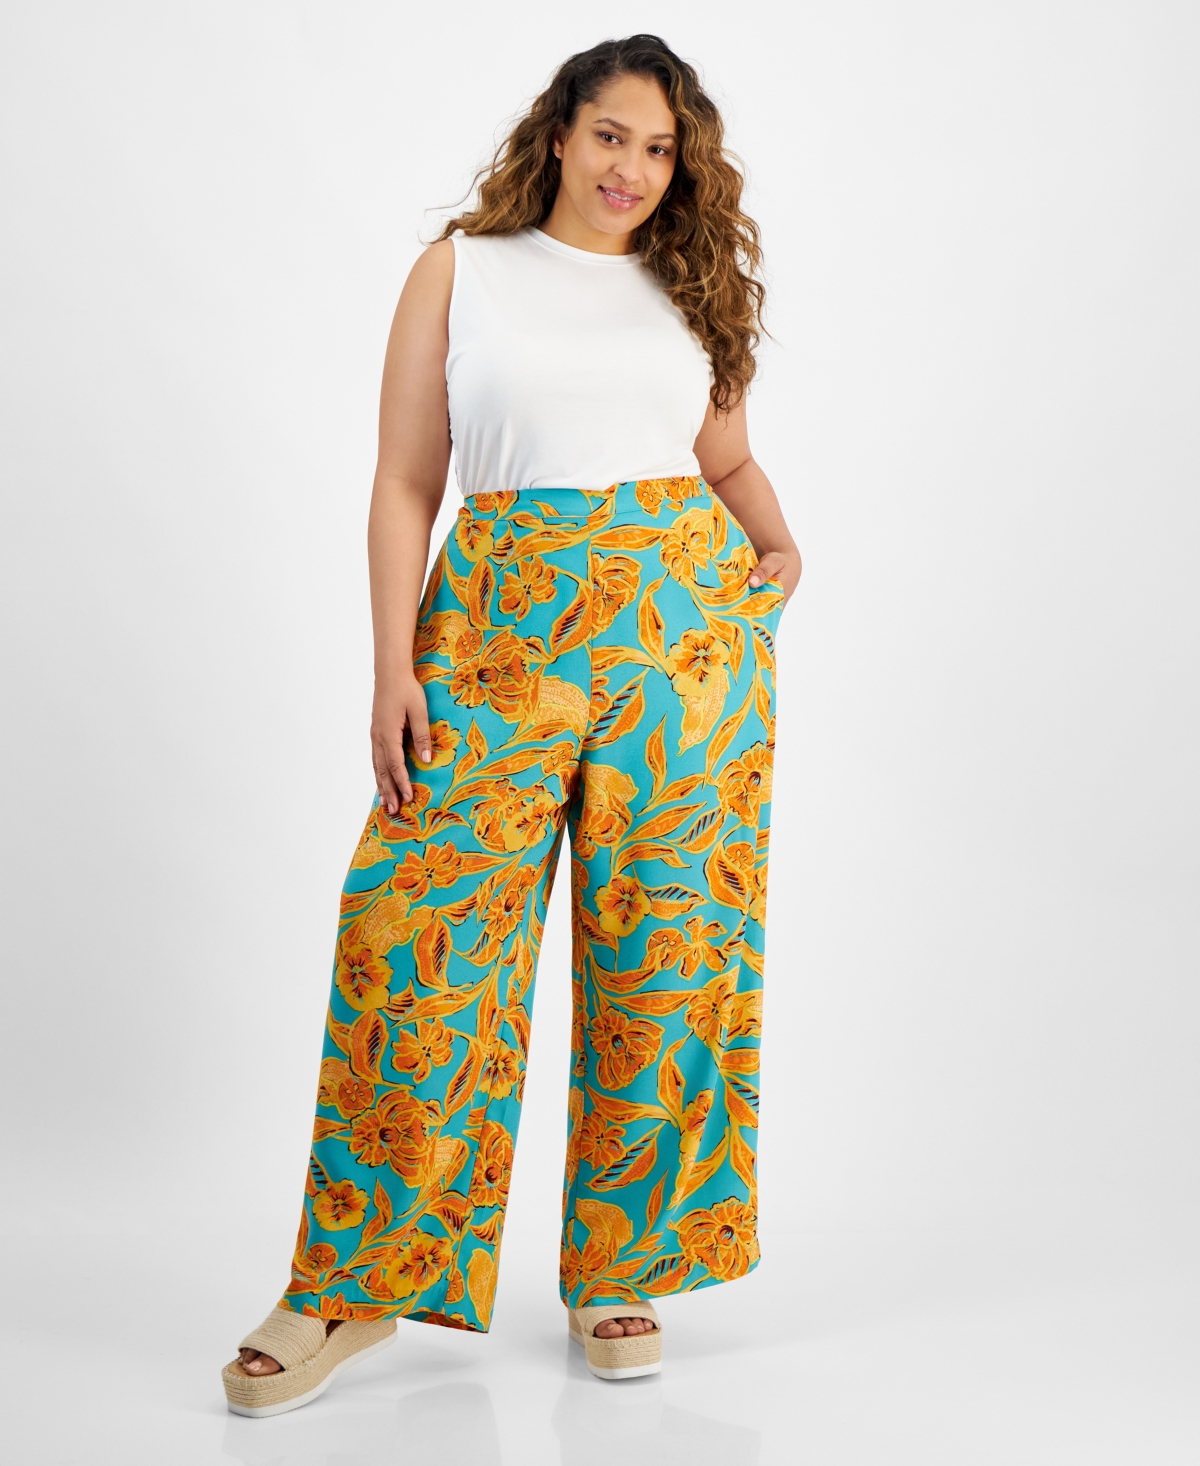 Trendy Plus Size Floral Flat-Front Wide-Leg Pants, Created for Macy's - Bali Garden